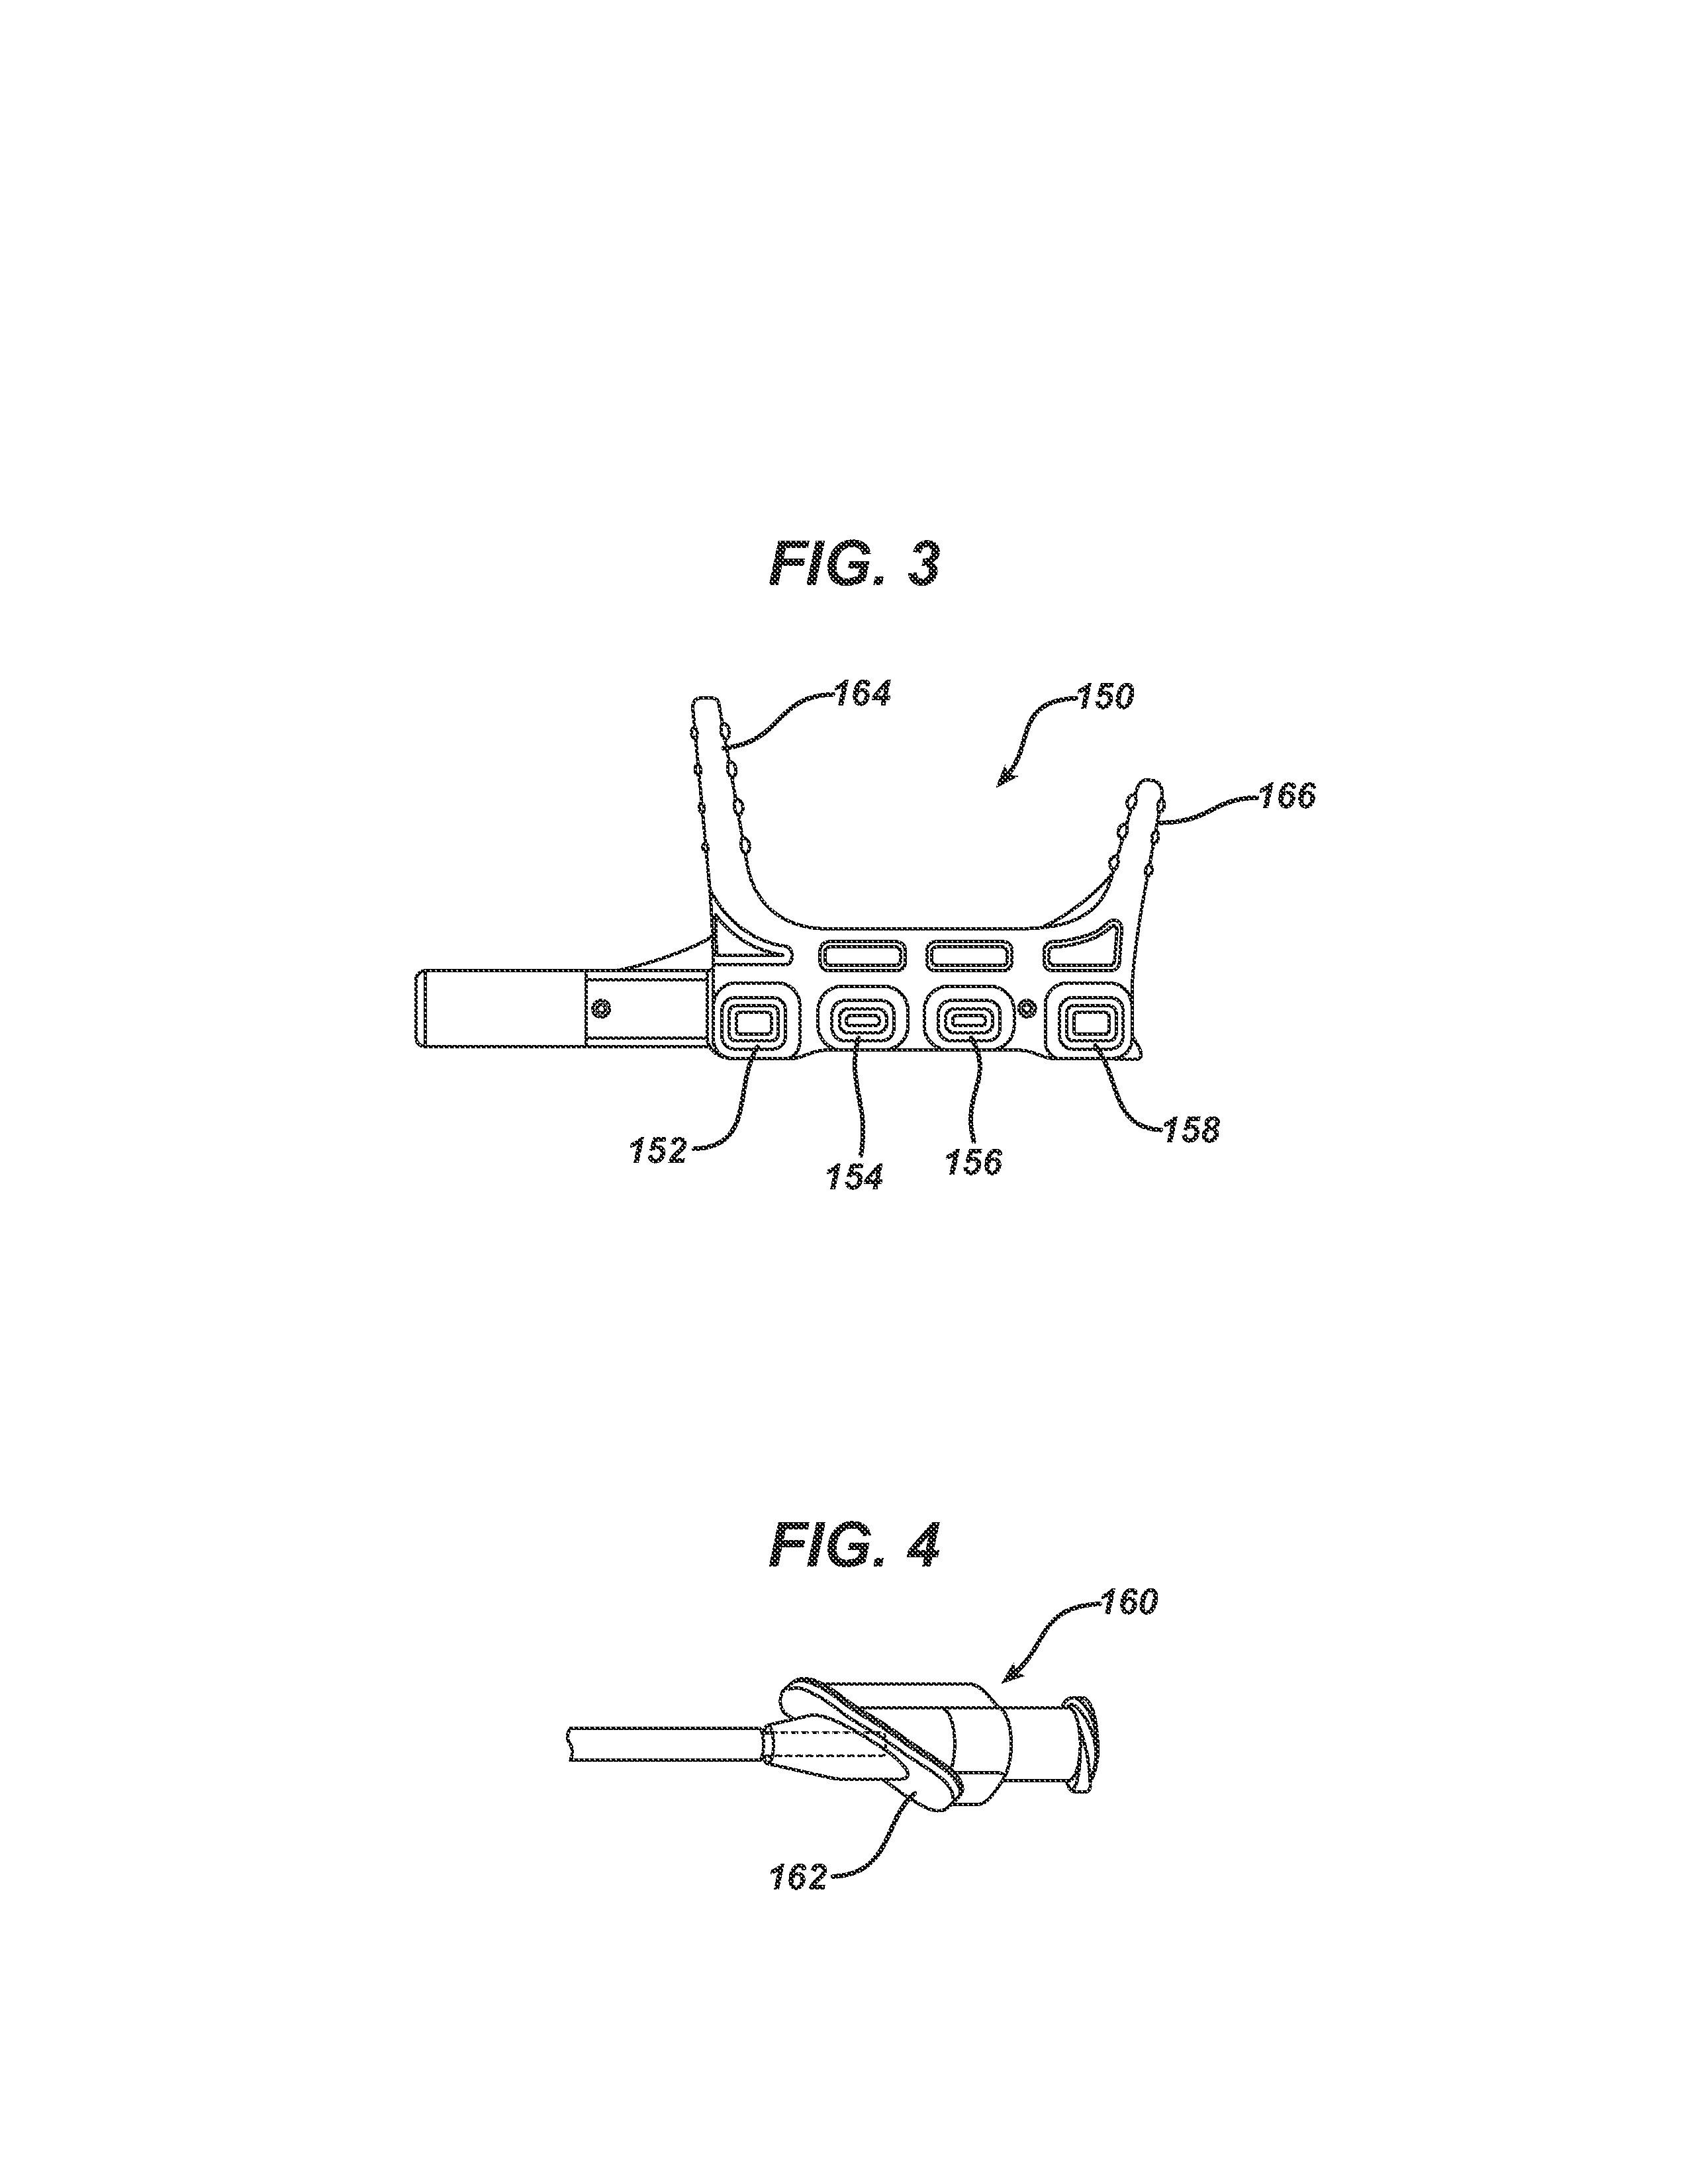 Devices and methods for transnasal irrigation or suctioning of the sinuses